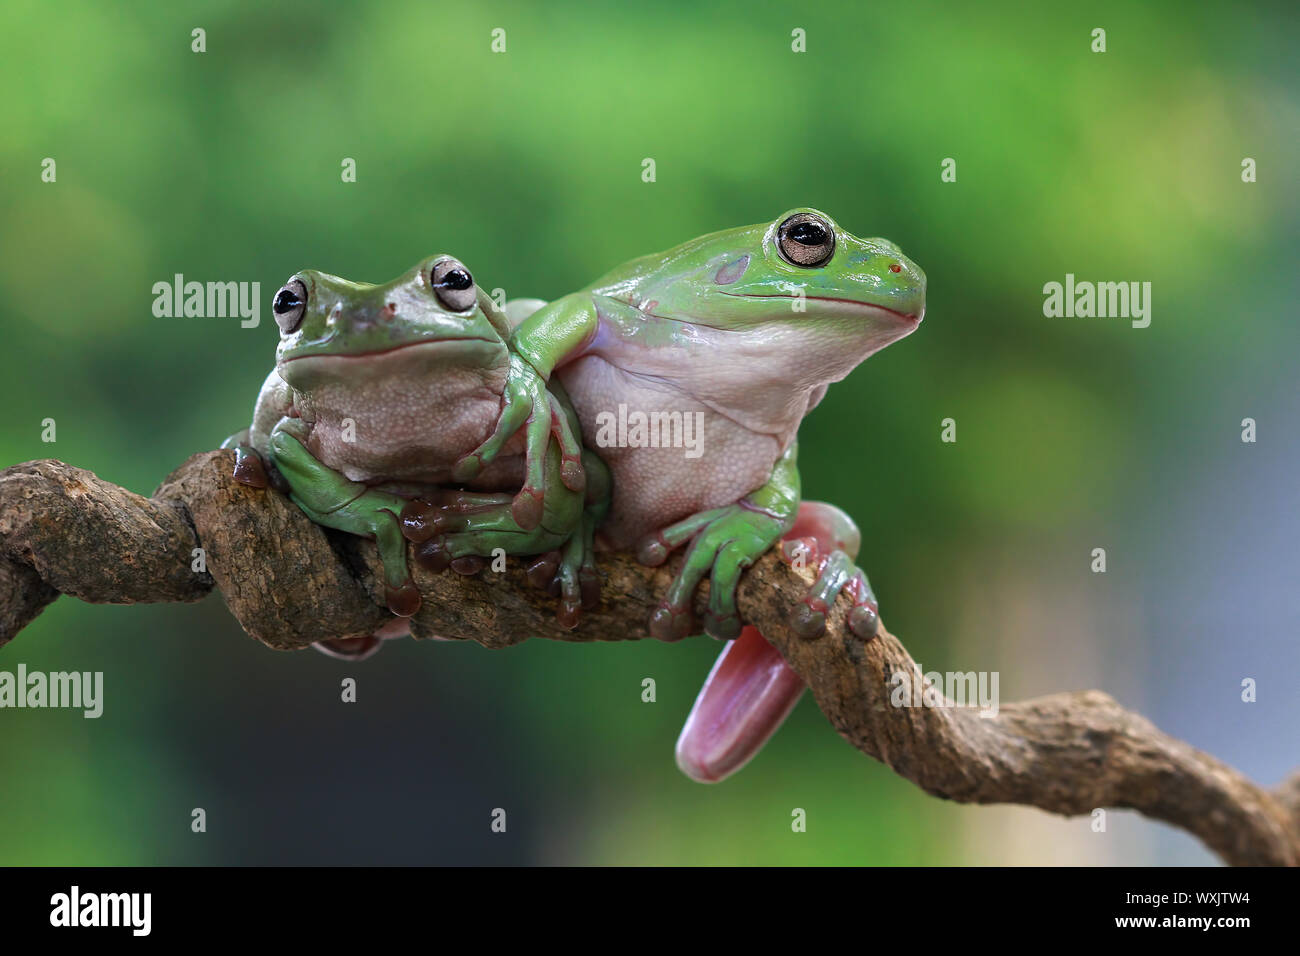 Two Dumpy tree frogs on a branch, Indonesia Stock Photo